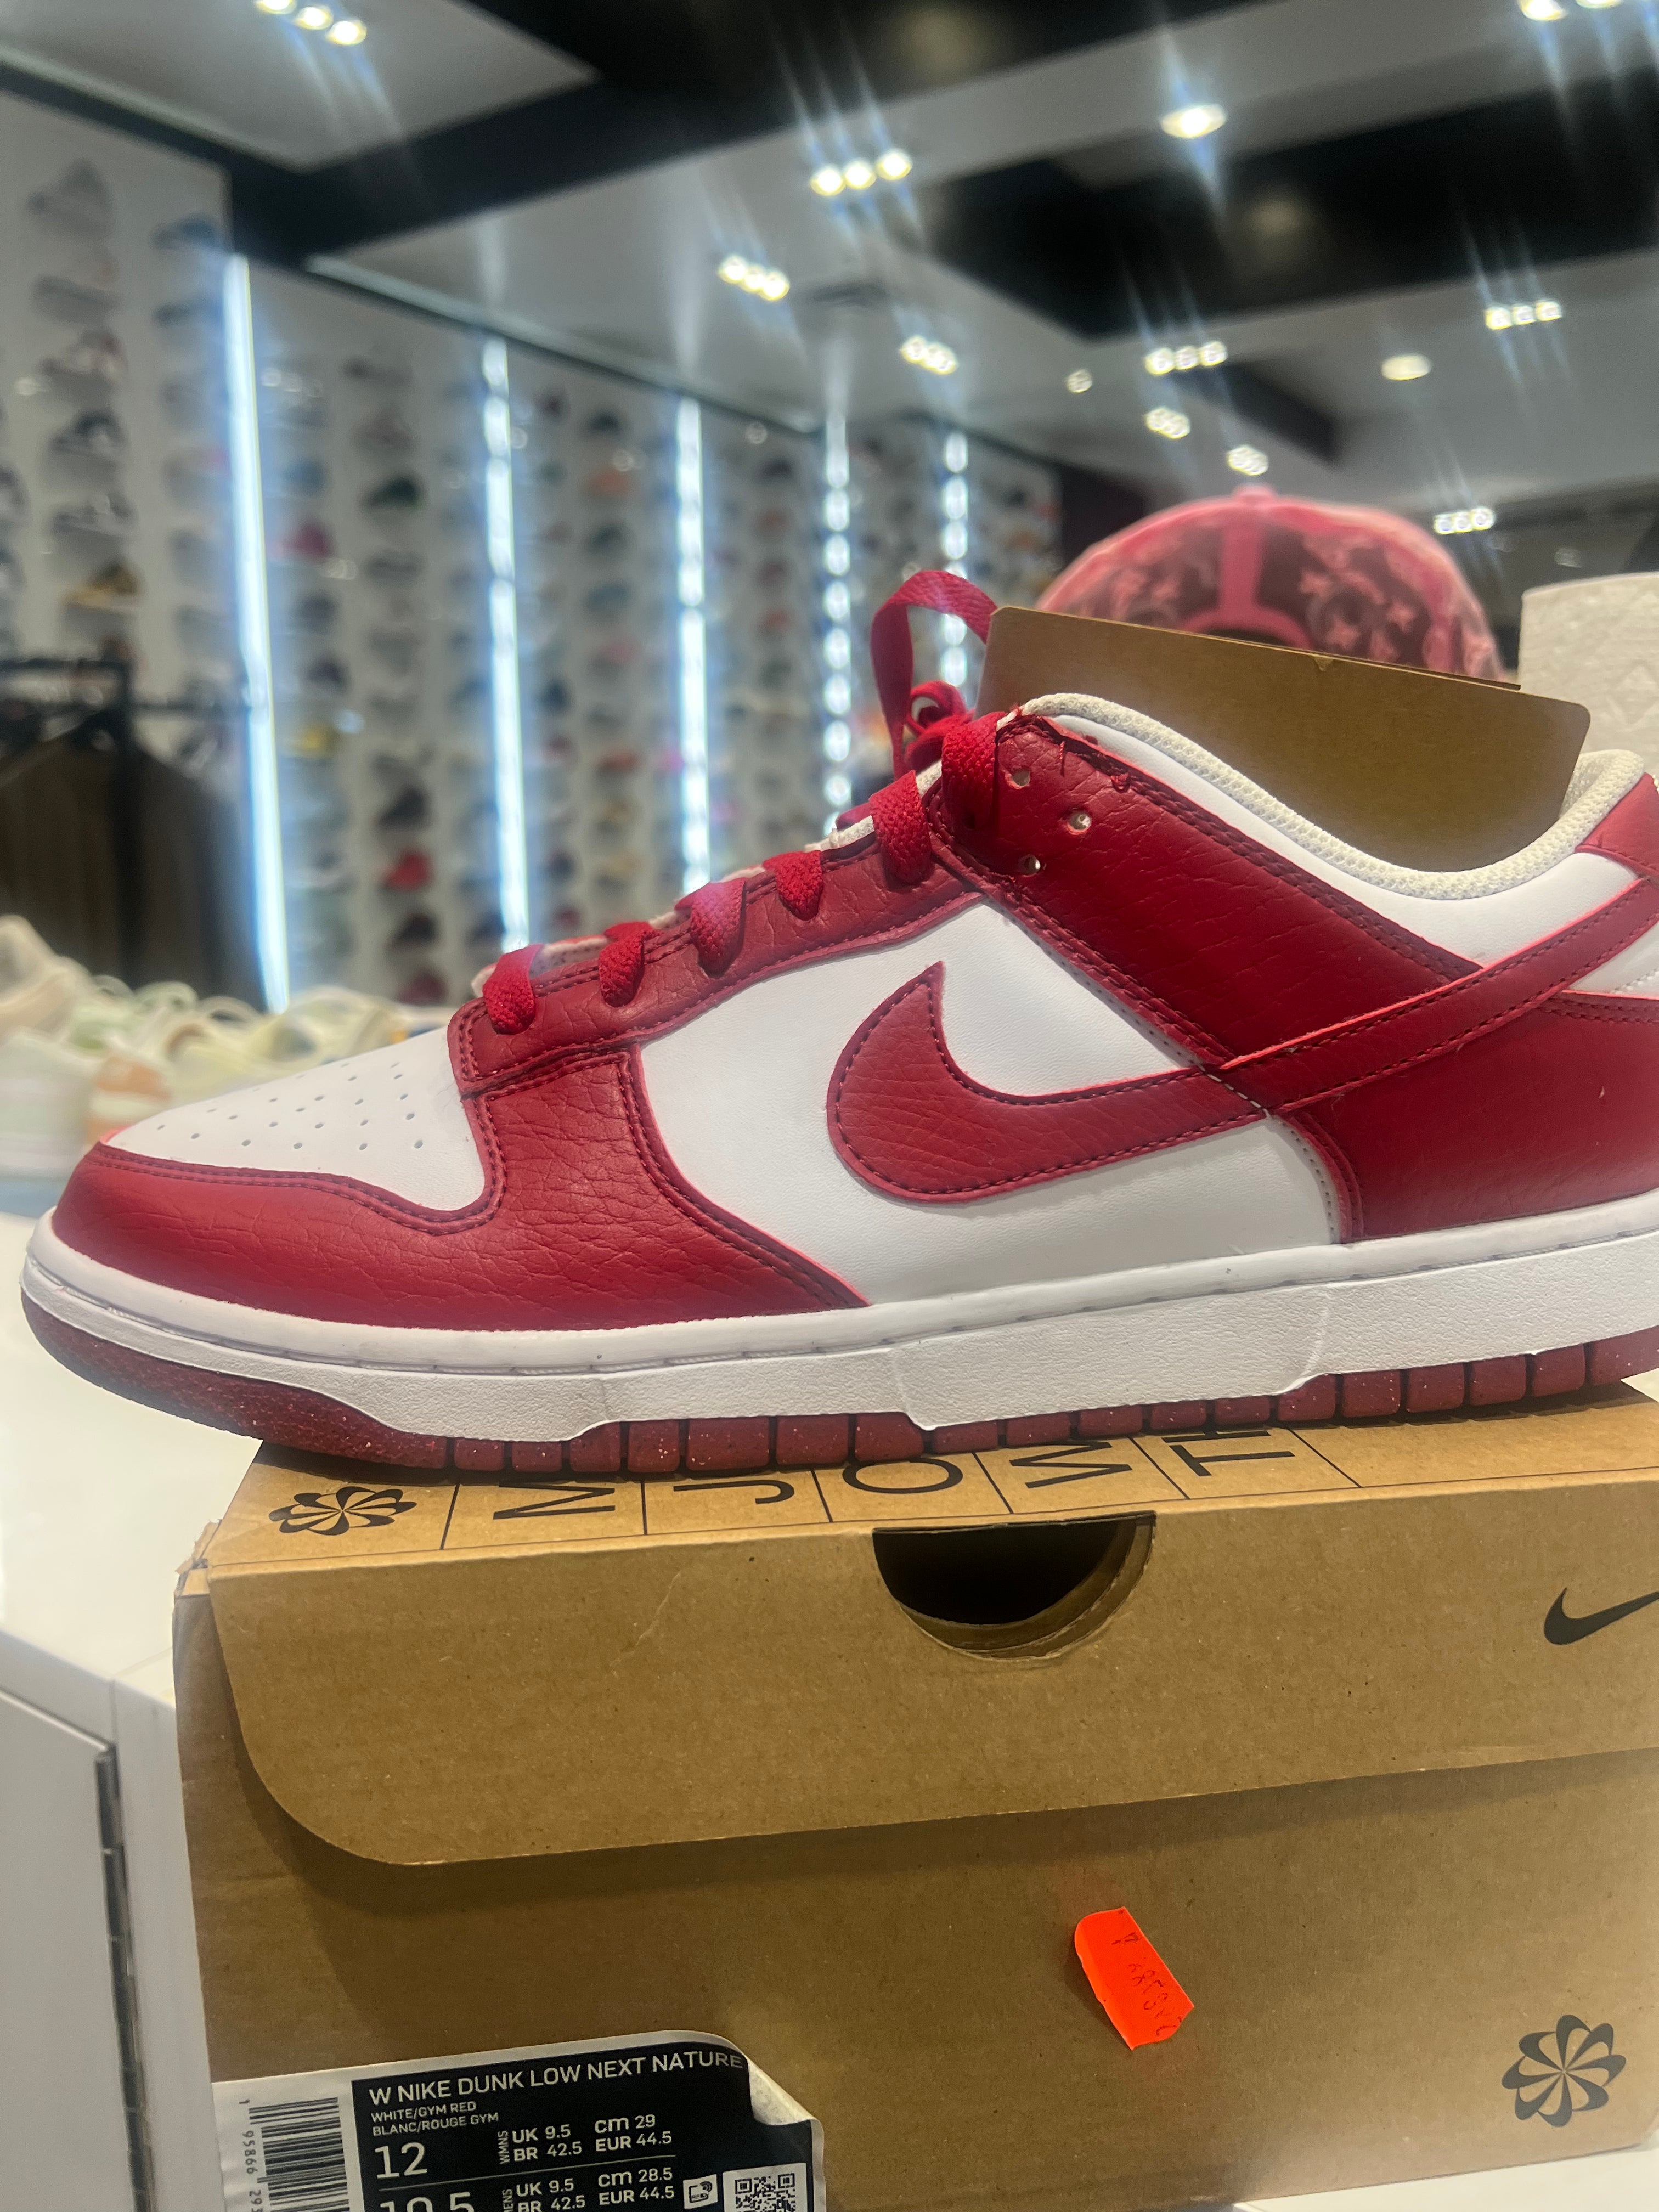 Nike Dunk Low  Nature  Gym Red W